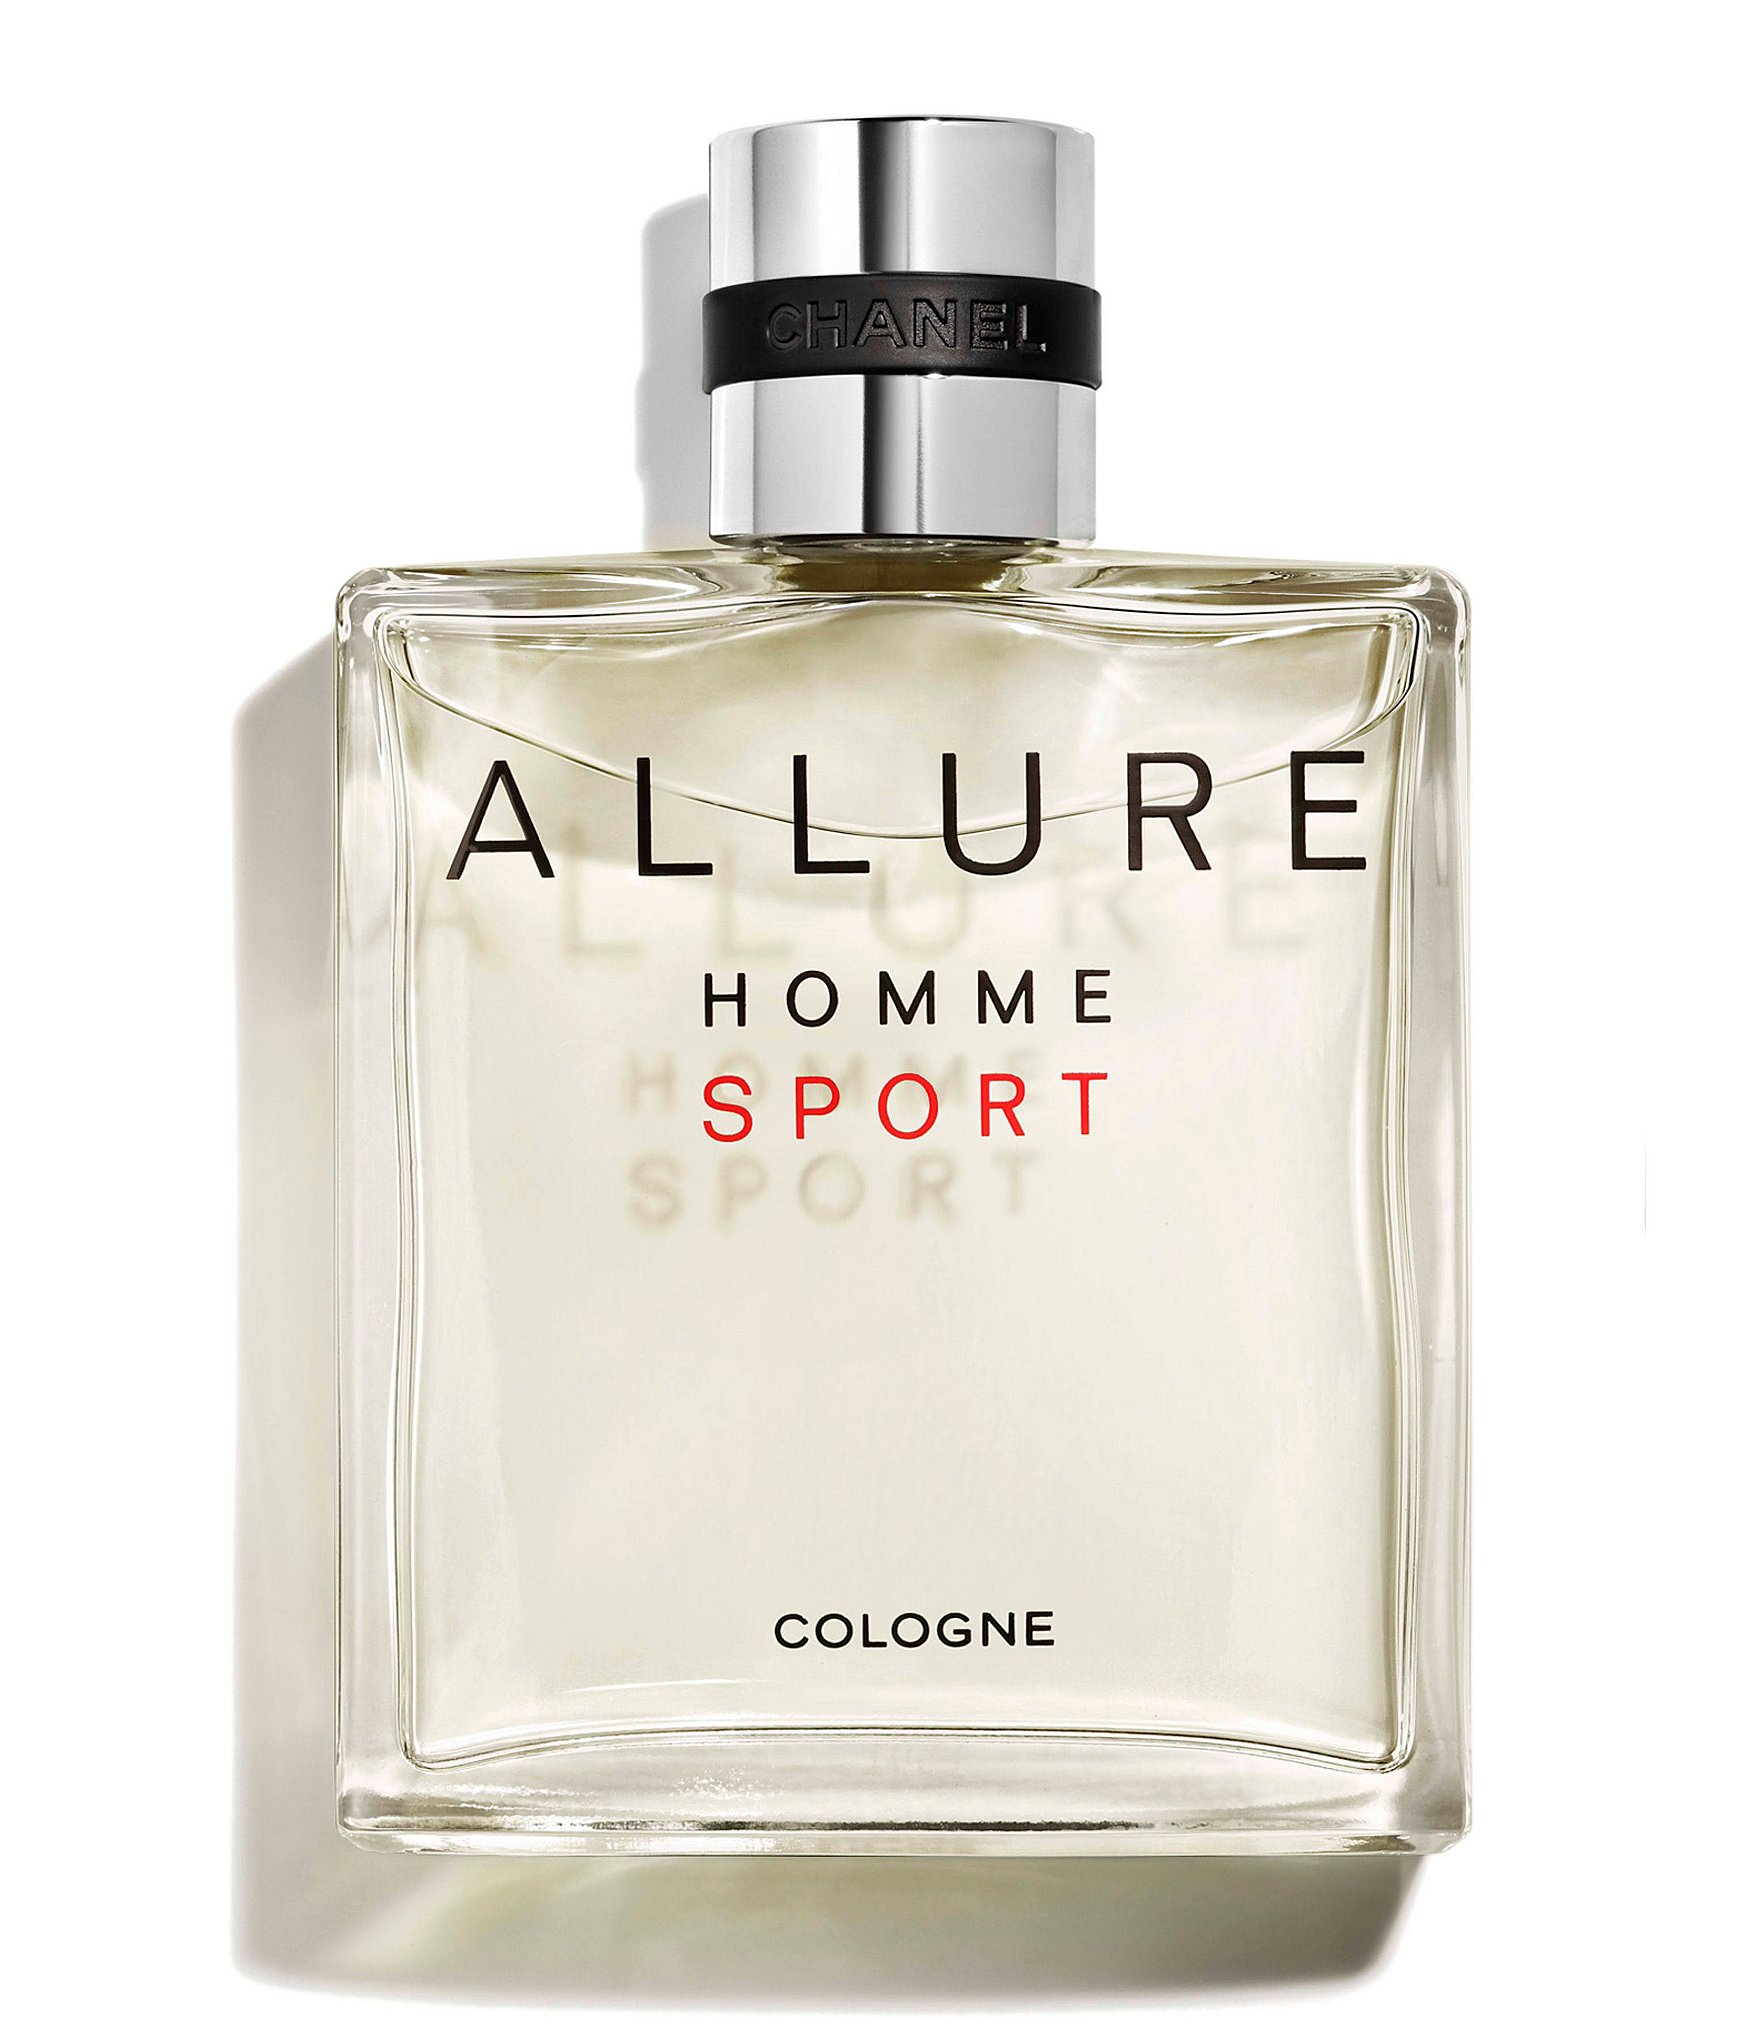 chanel allure homme sport cologne